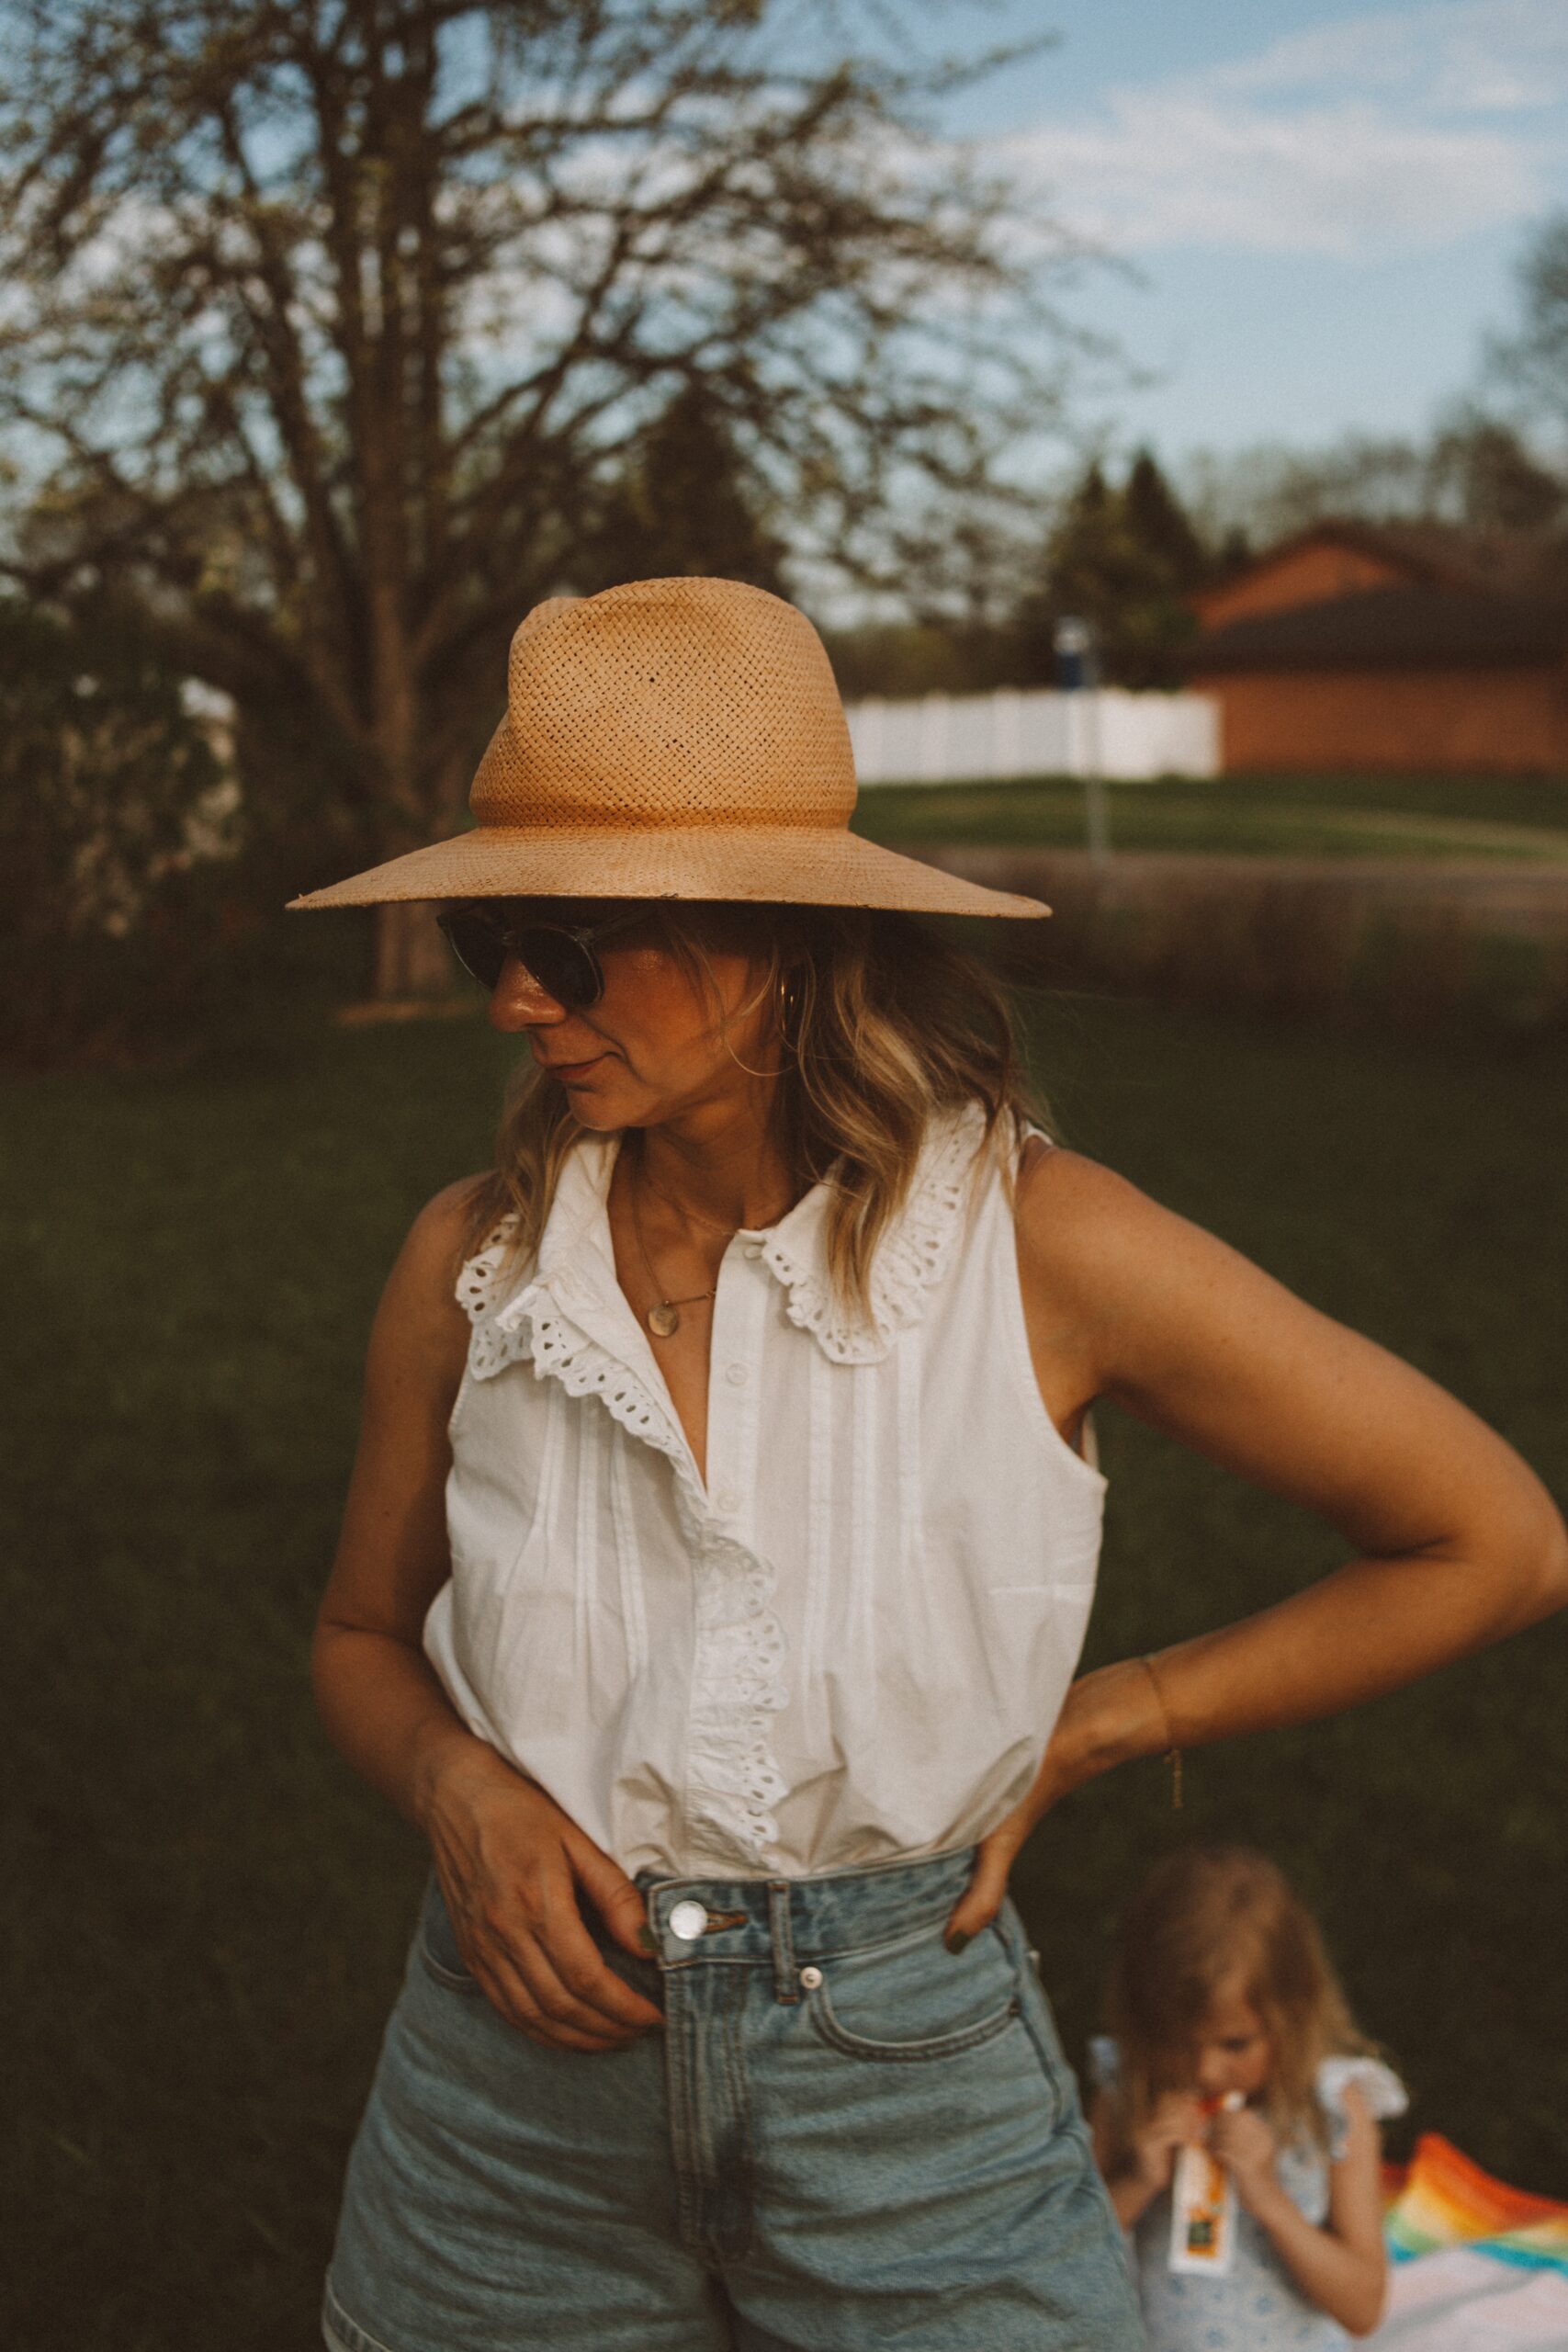 Karin Emily wears white tops from Sezane with a pair of Everlane denim shorts, and a janessa leone hat